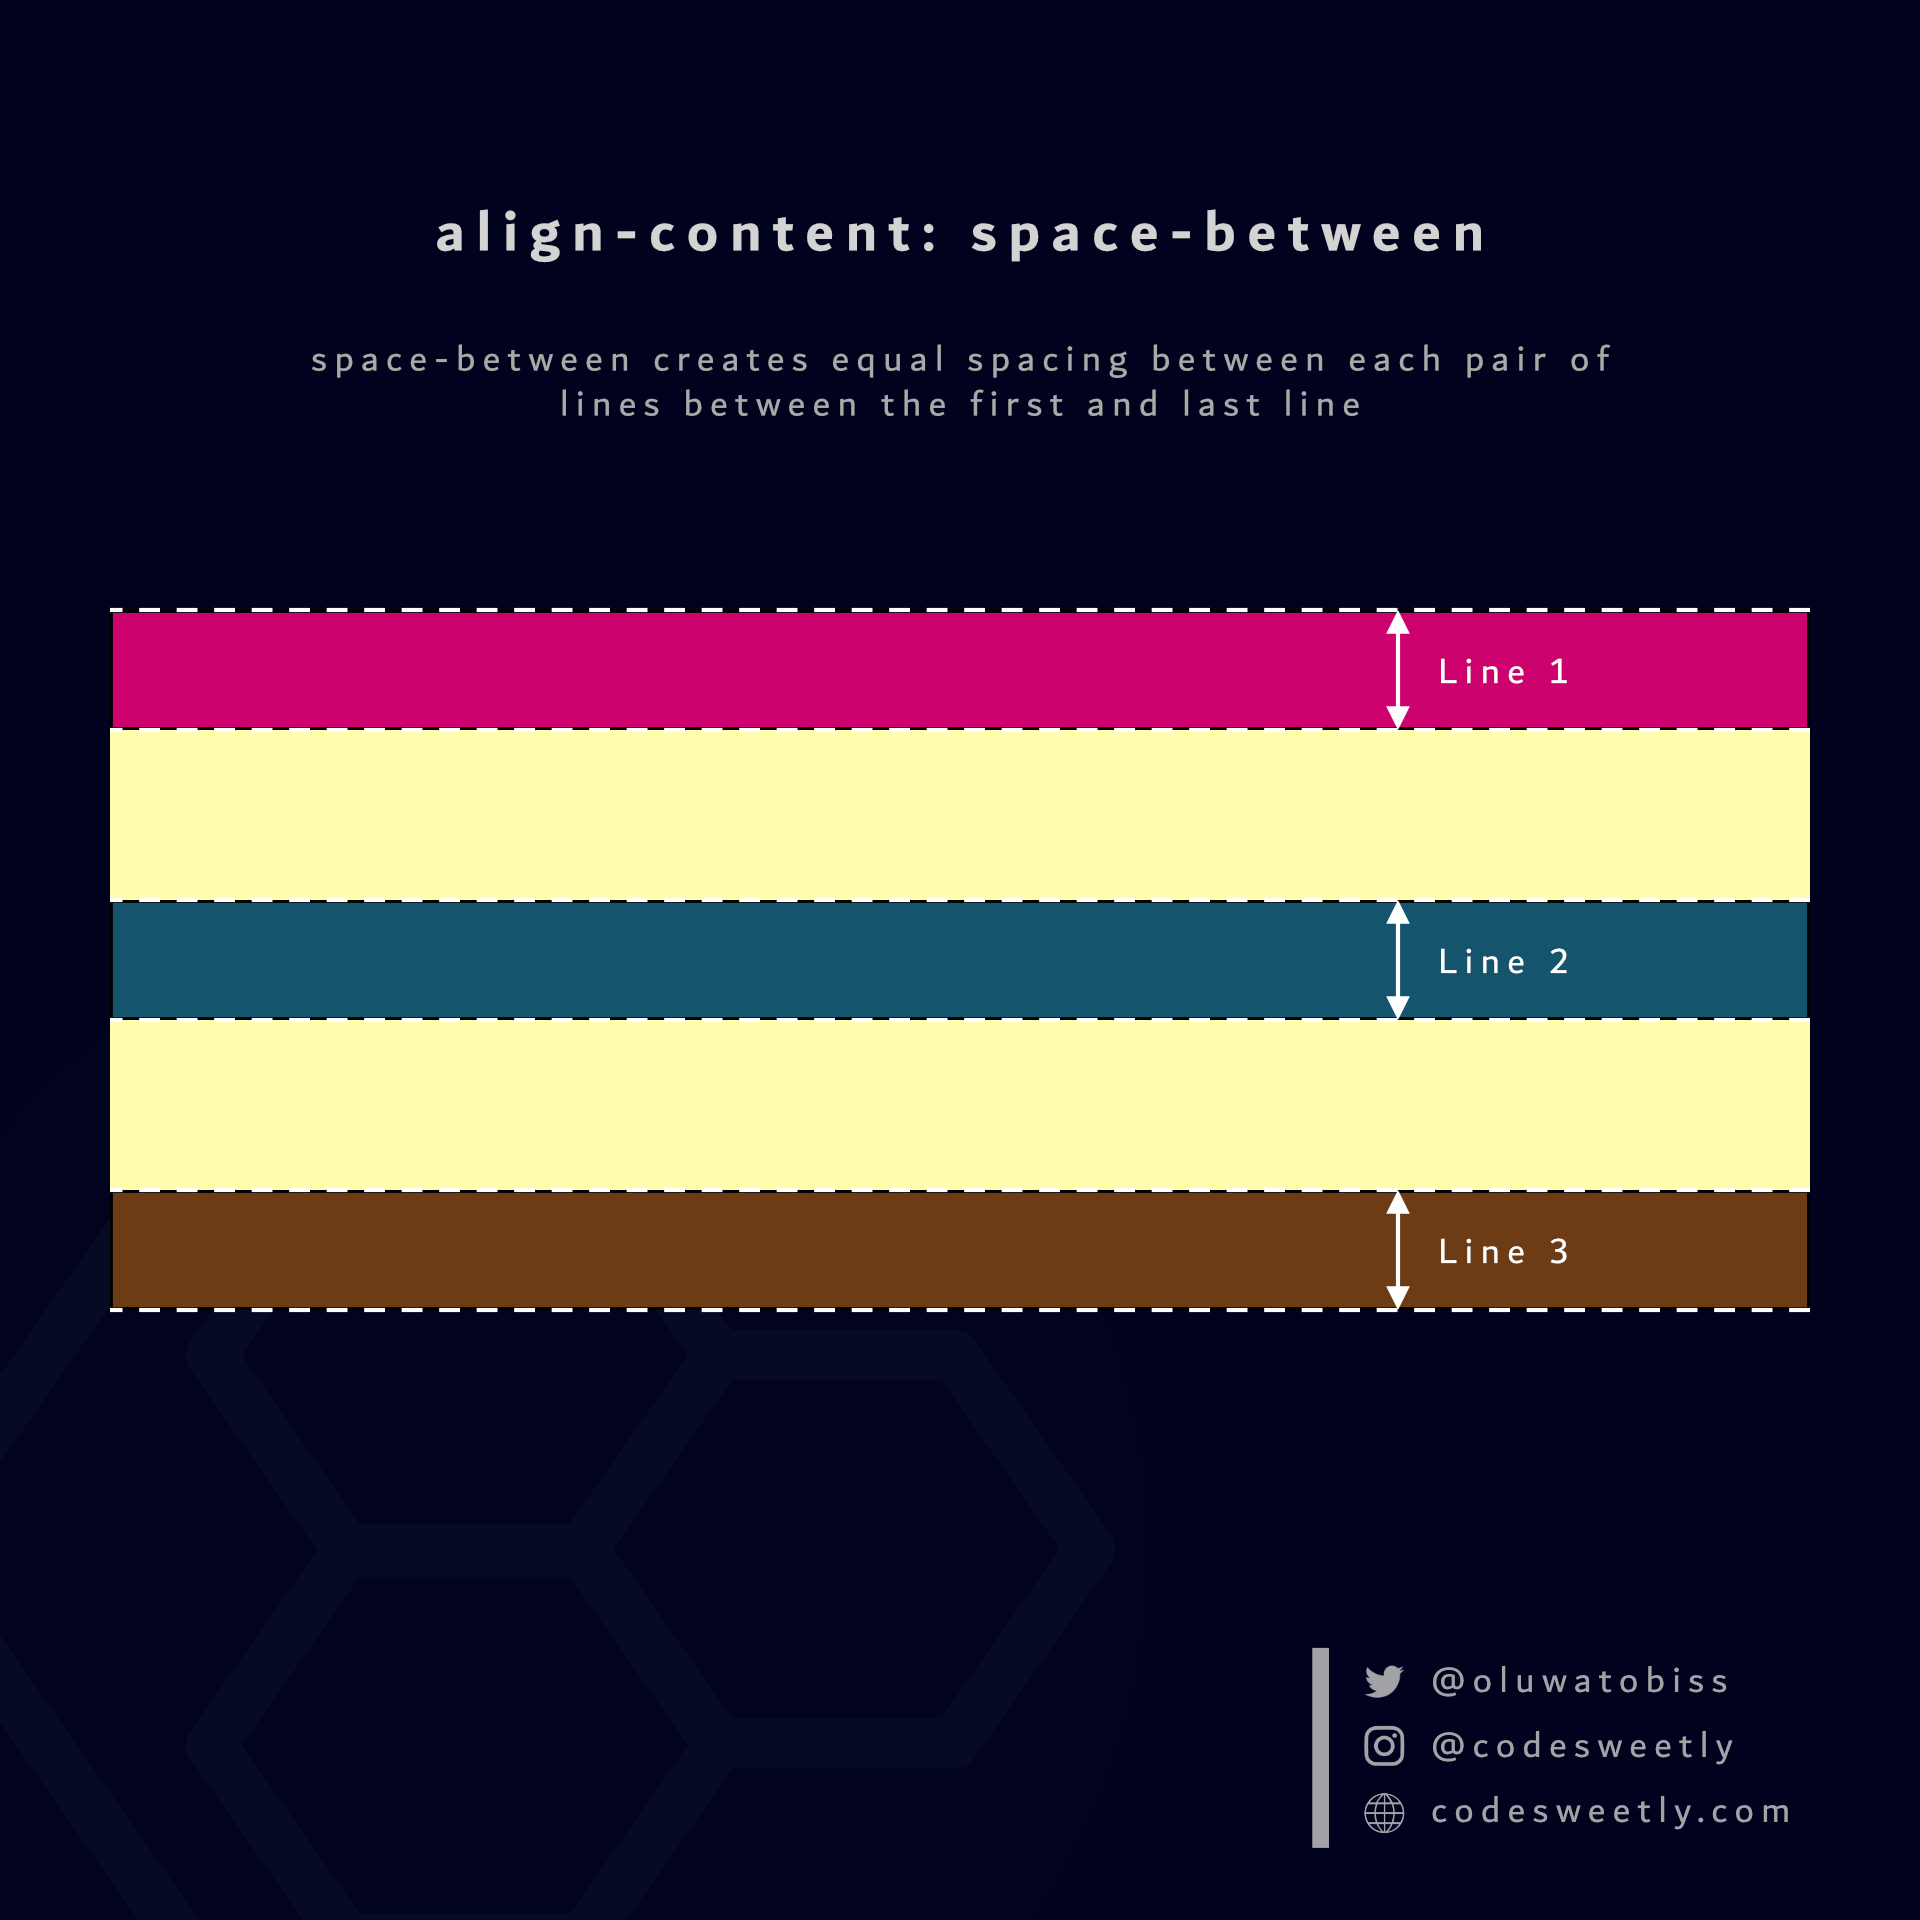 align-content's space-between value creates equal spacing between each pair of lines between the first and last line